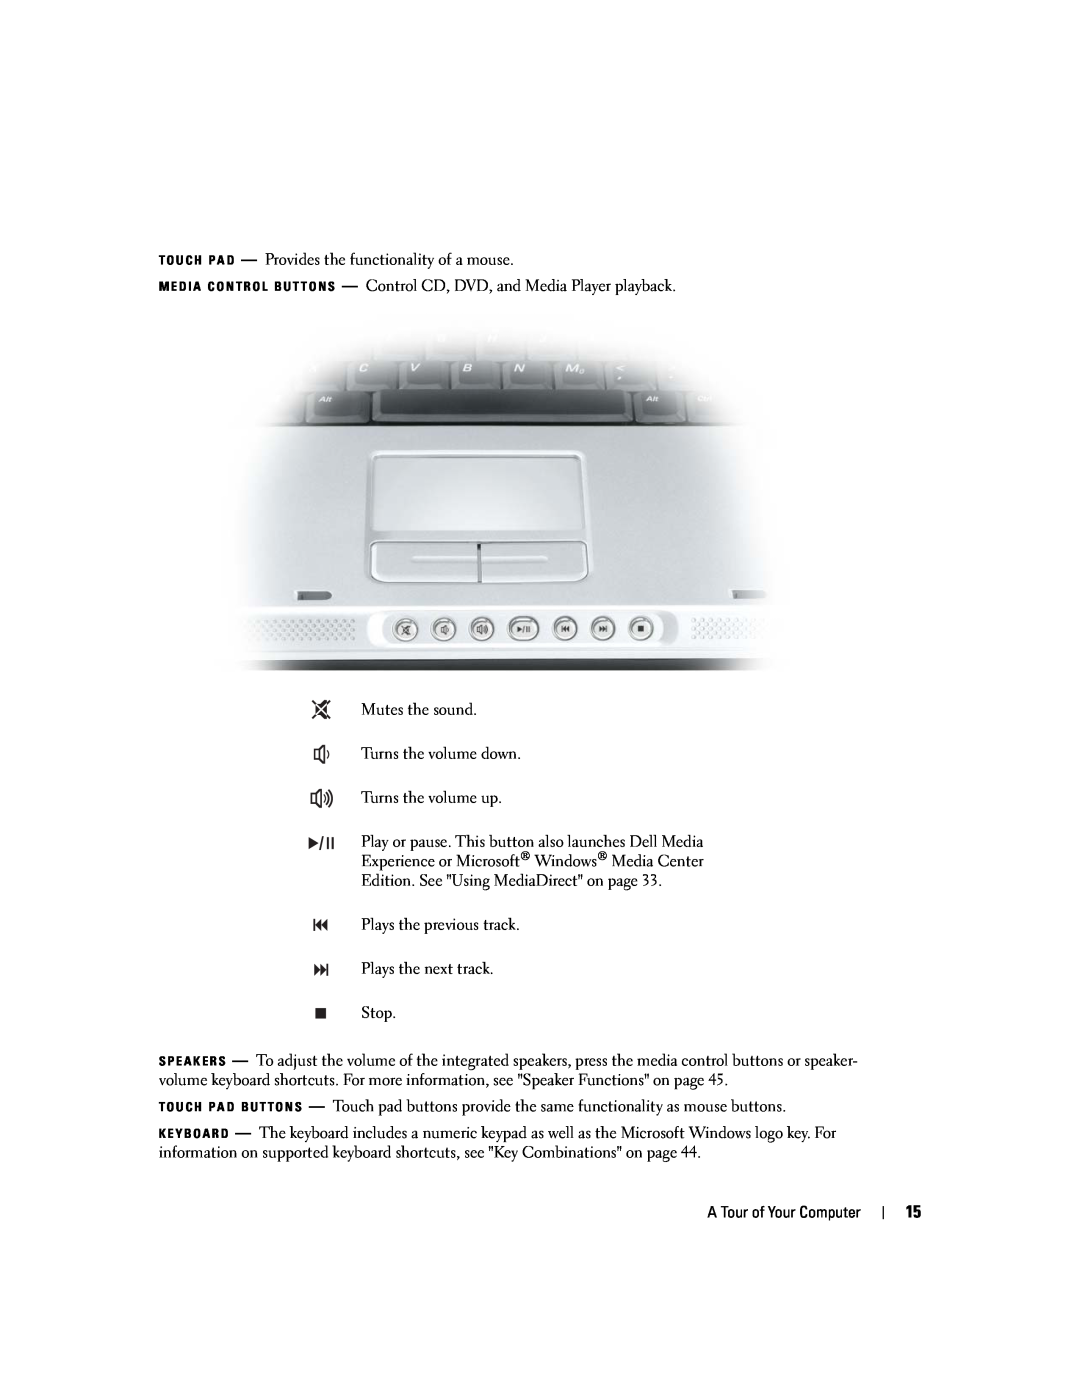 Dell 9300 owner manual T O U C H P A D - Provides the functionality of a mouse 